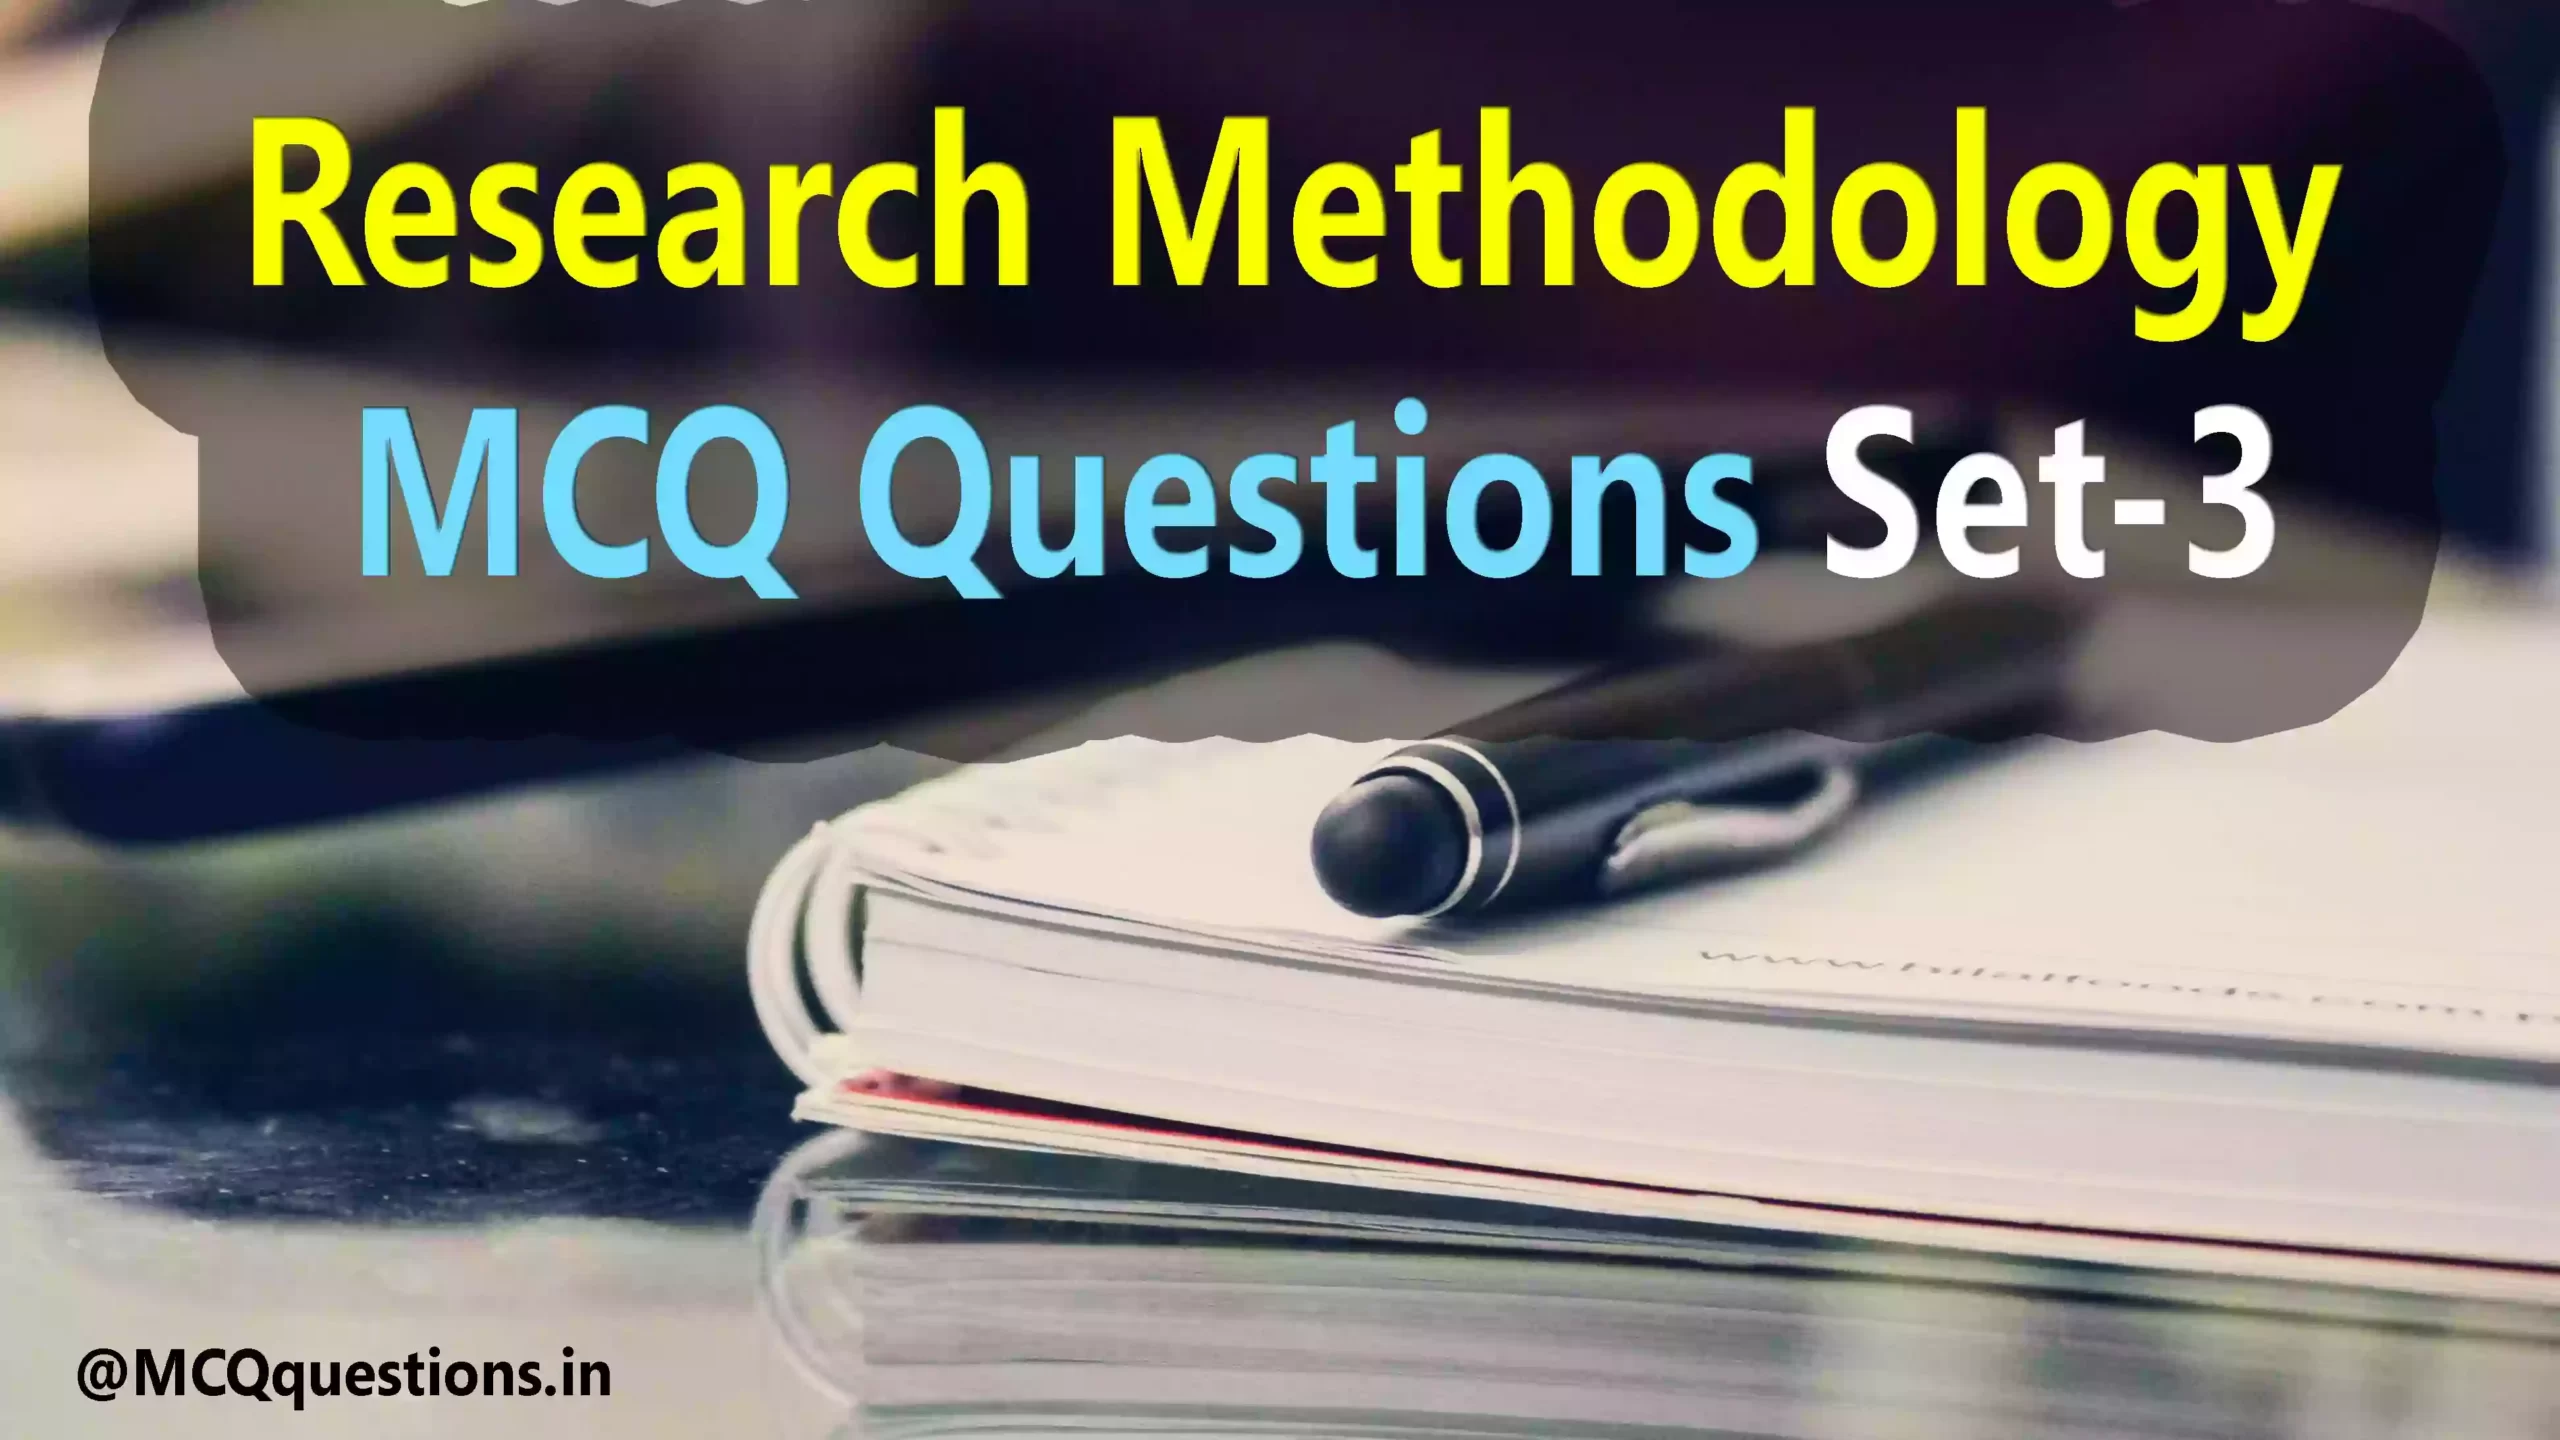 Research Methodology MCQ Questions Set-1